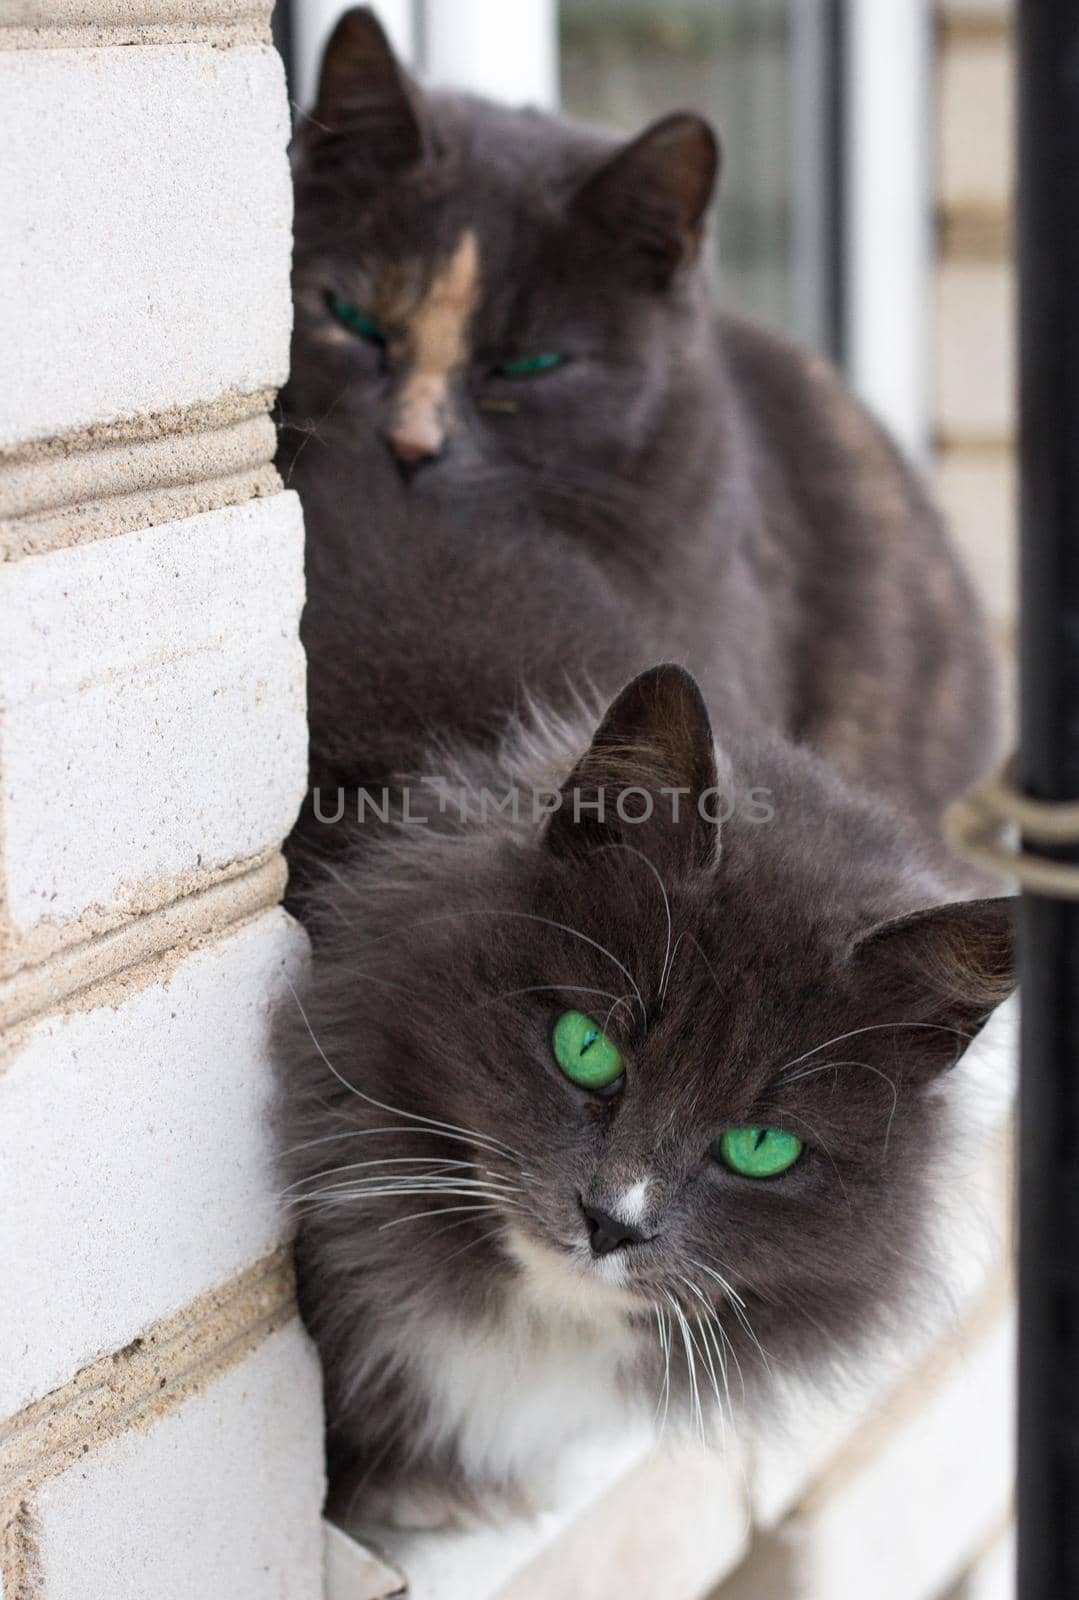 Close up of two gray furry cats with bright green eyes sitting on window